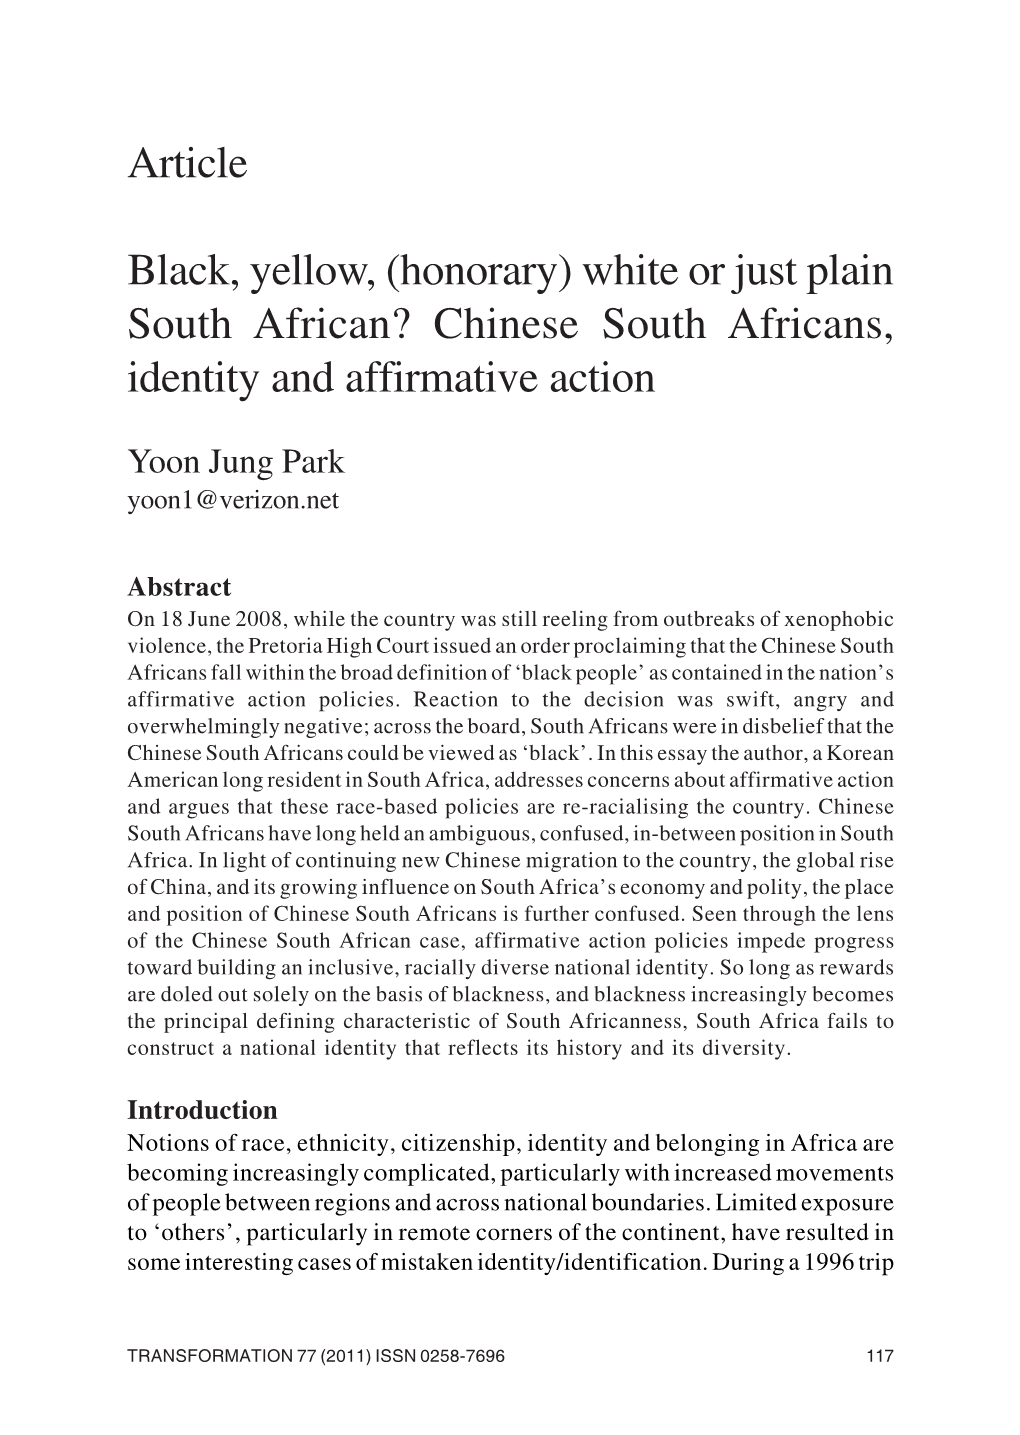 Chinese South Africans, Identity and Affirmative Action